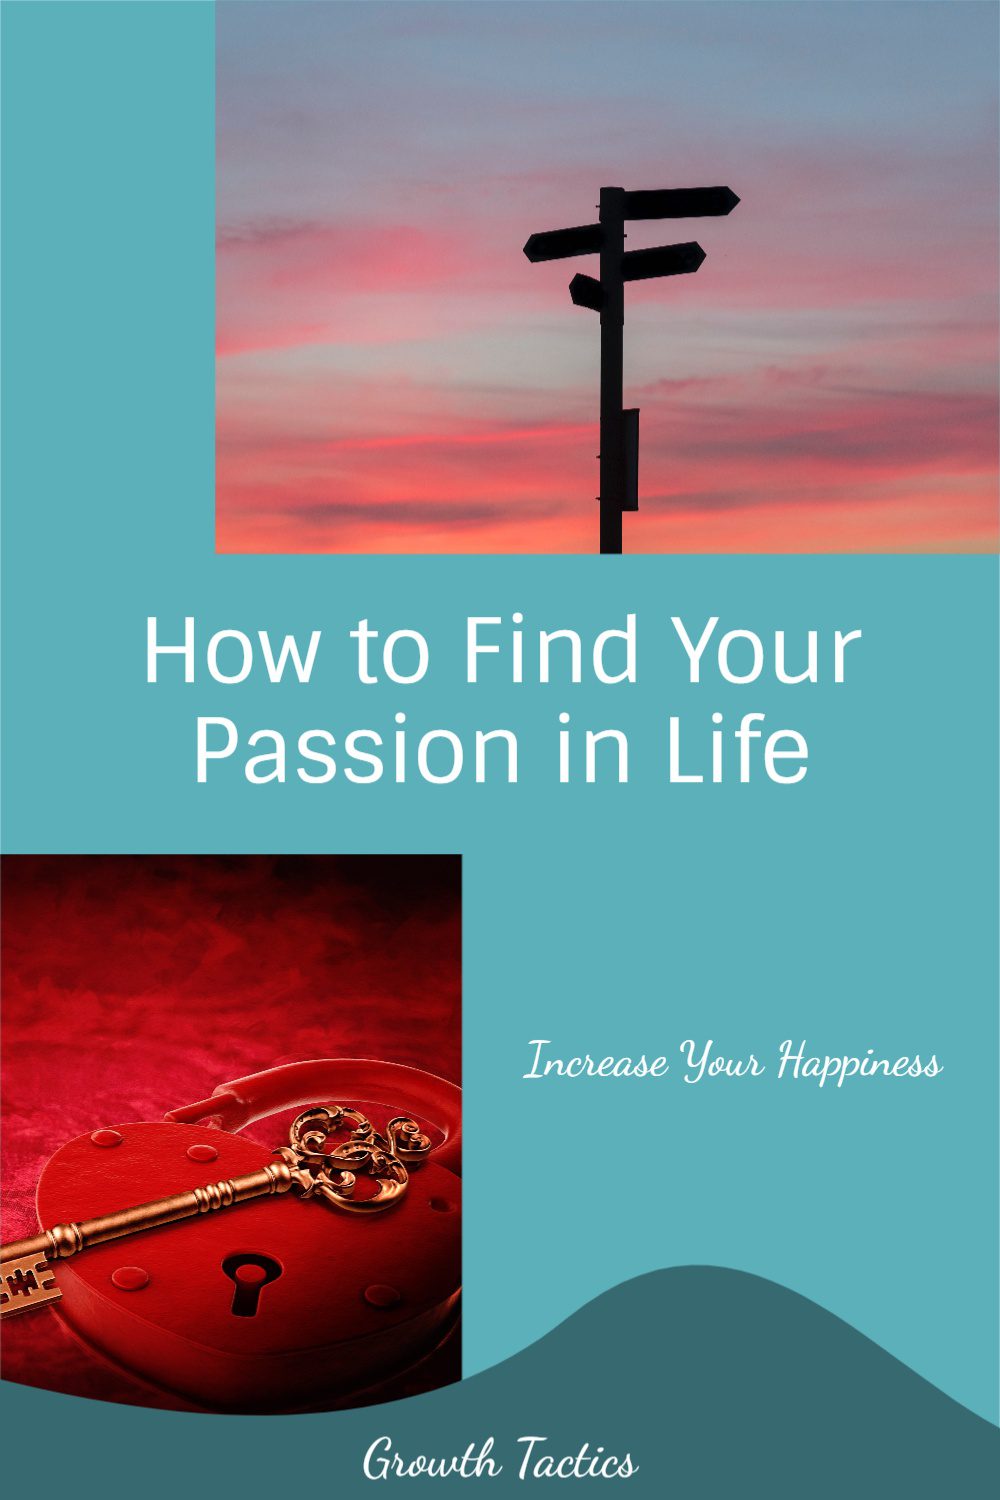 How to Find Your Passion in Life and Increase Happiness